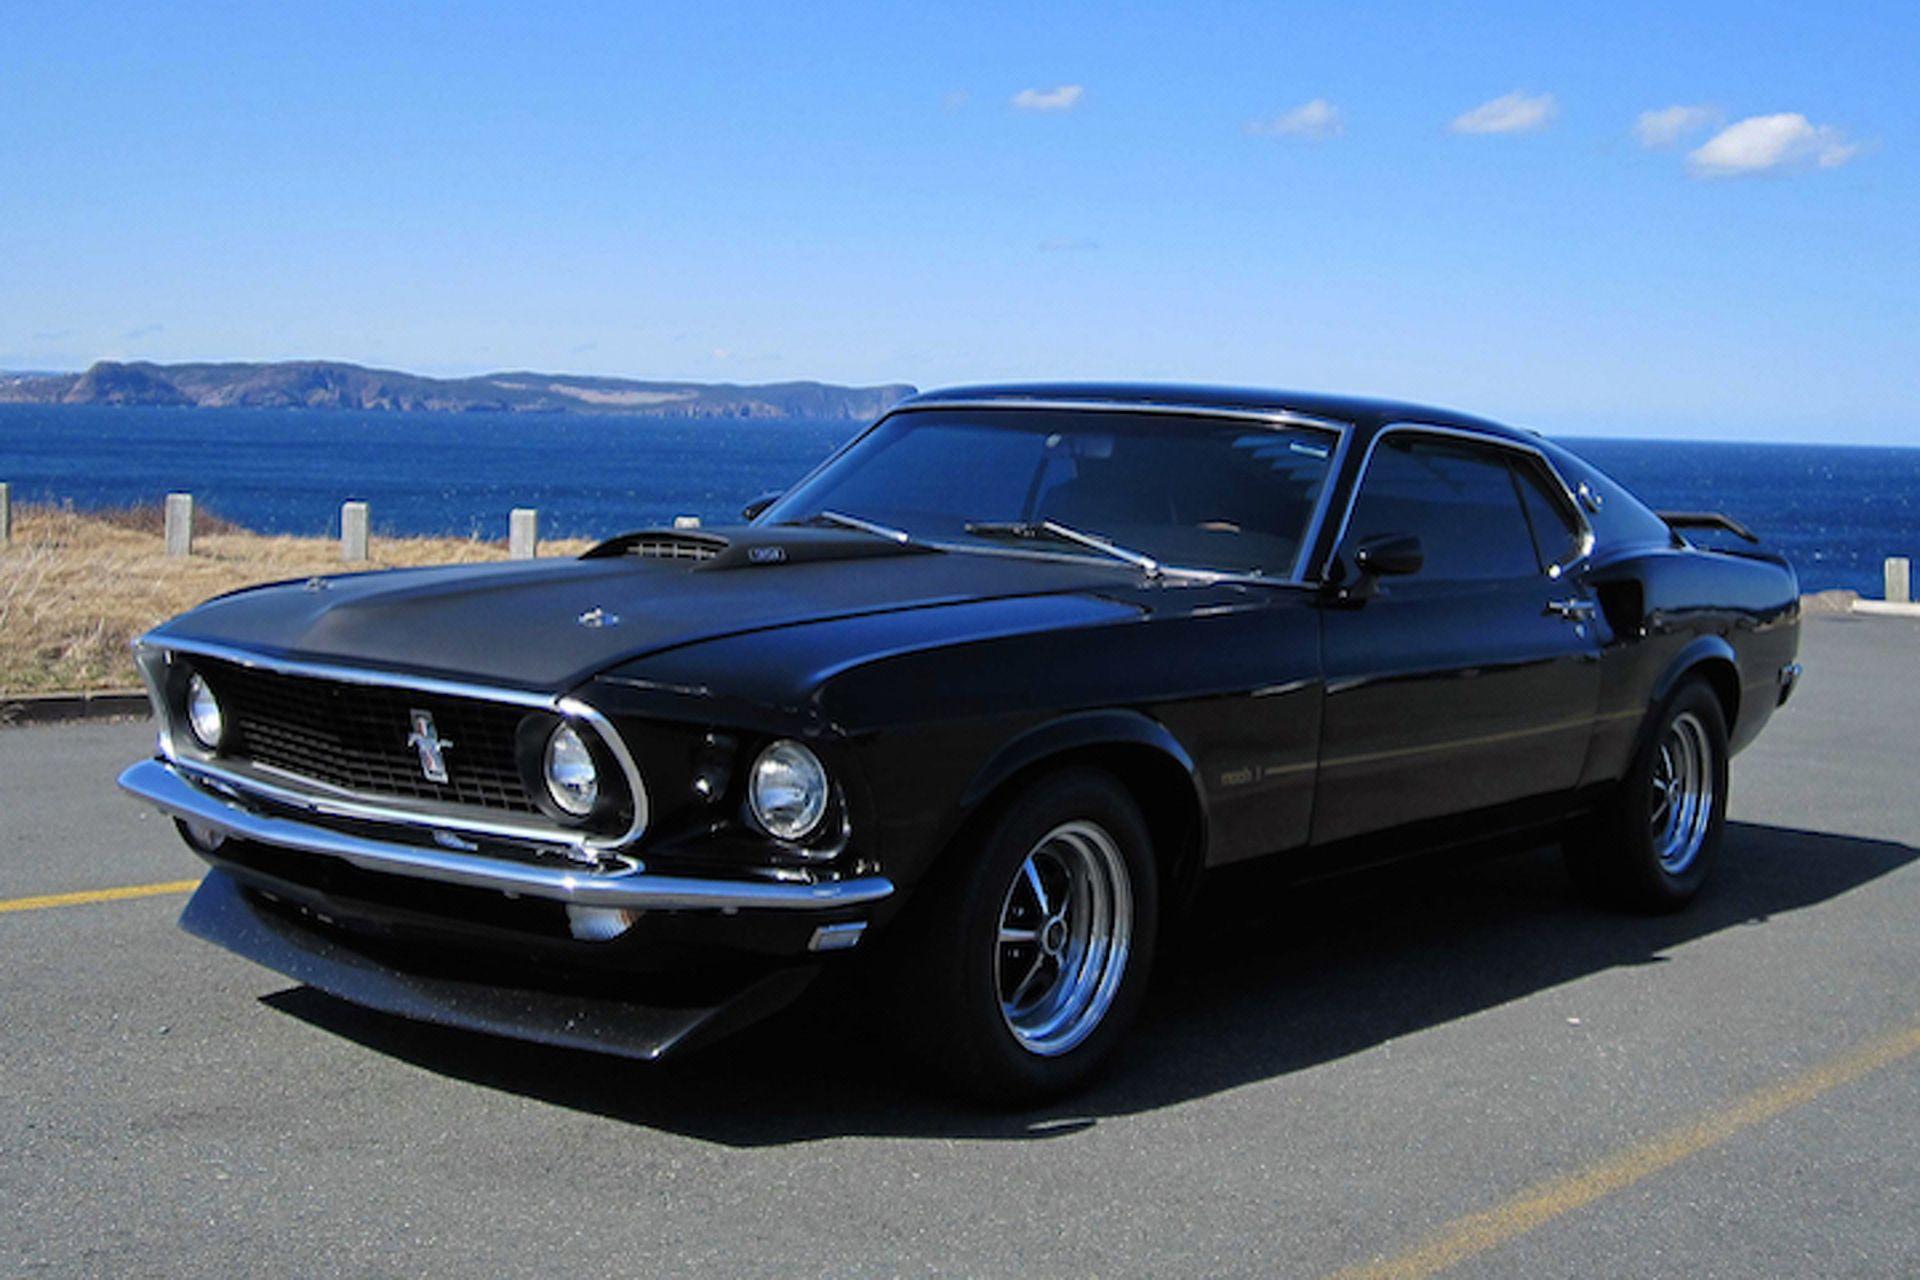 Ford Mustang Pony Wallpaper. Perfect Ford Mustang Wallpaper Blue